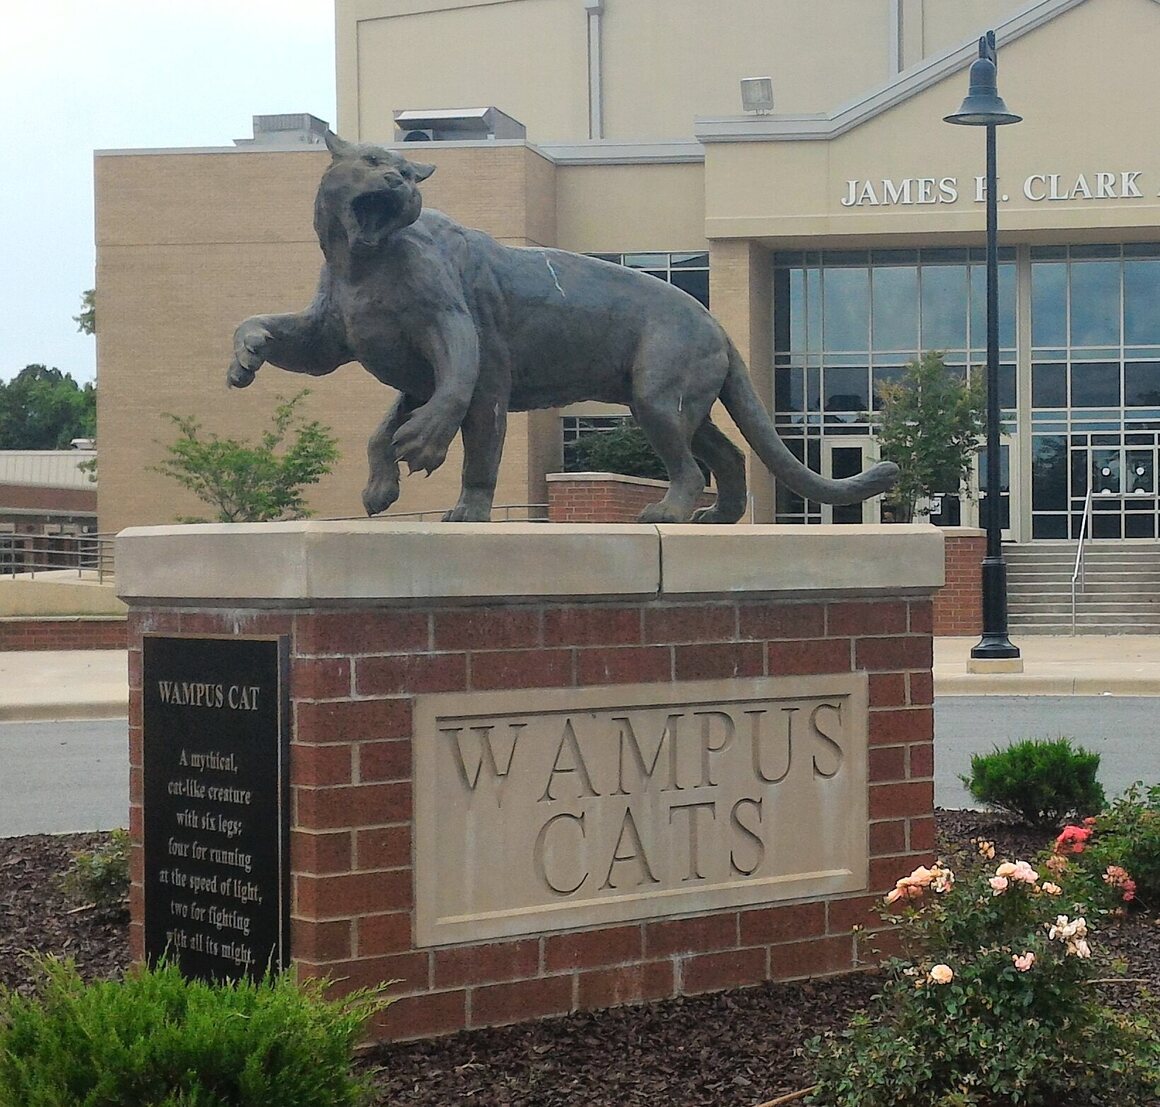 In 1922, Conway High School in central Arkansas adopted the wampus cat as their mascot. 